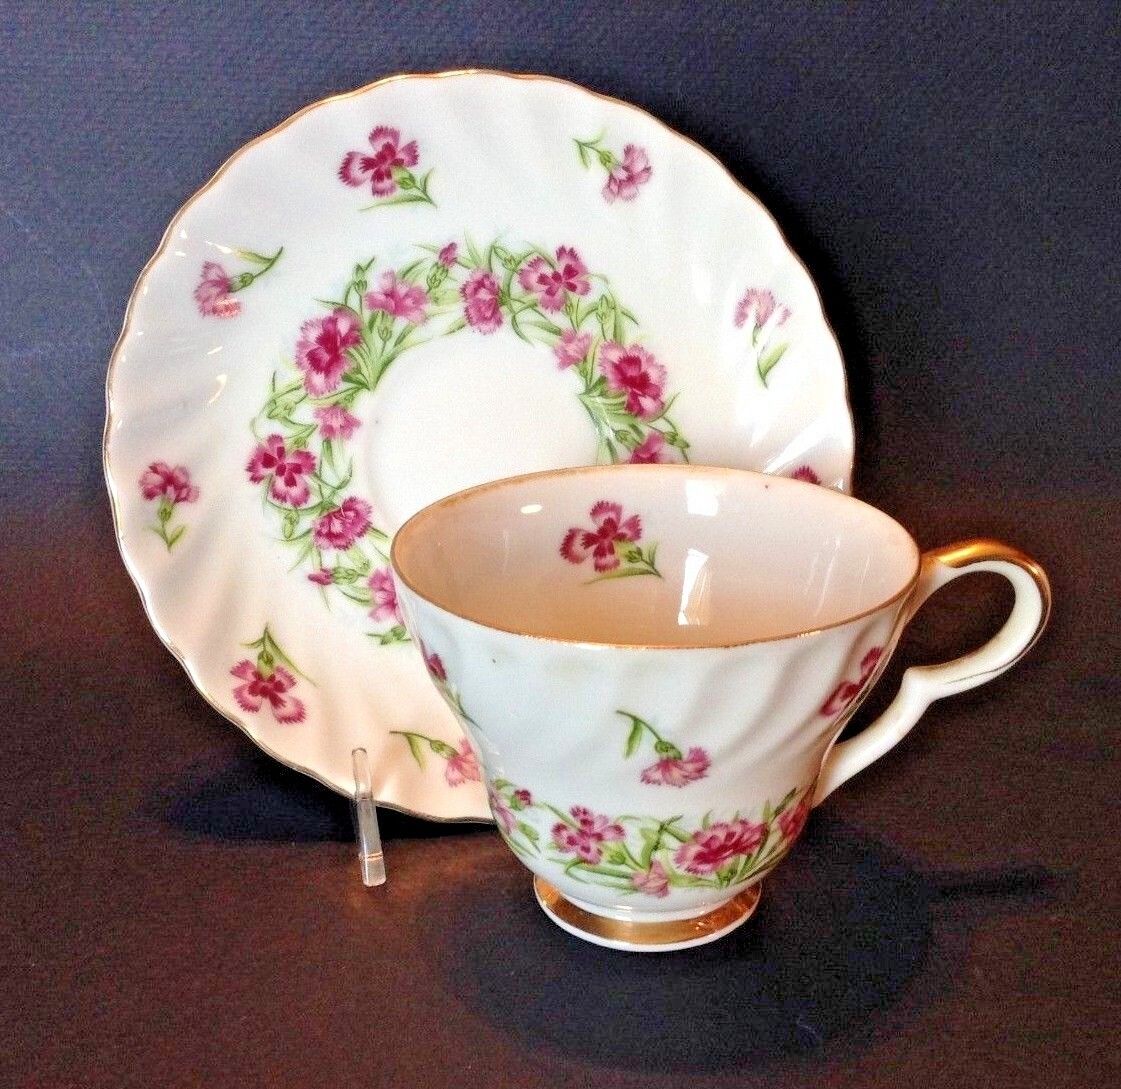 Lefton Tea Cup And Saucer - January - Carnation - Unused With Sticker - Japan